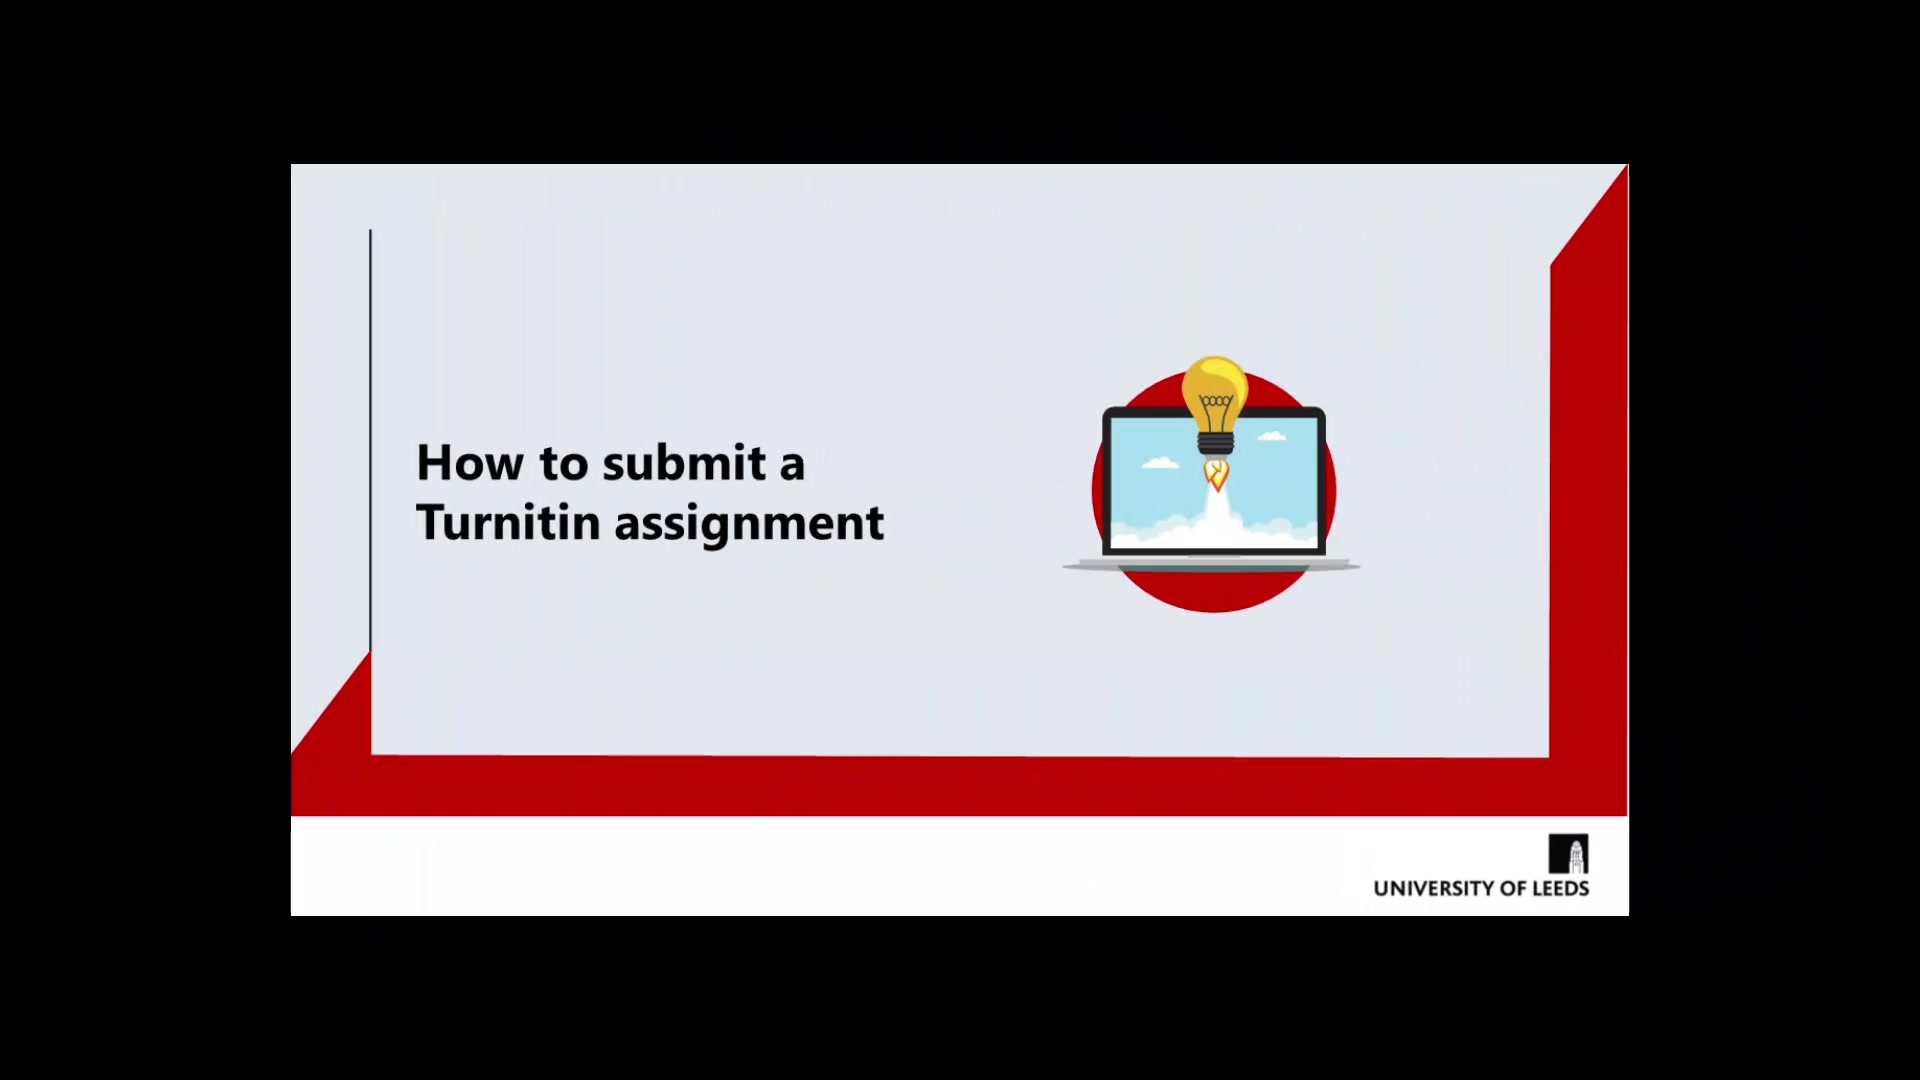 how to submit assignment using turnitin